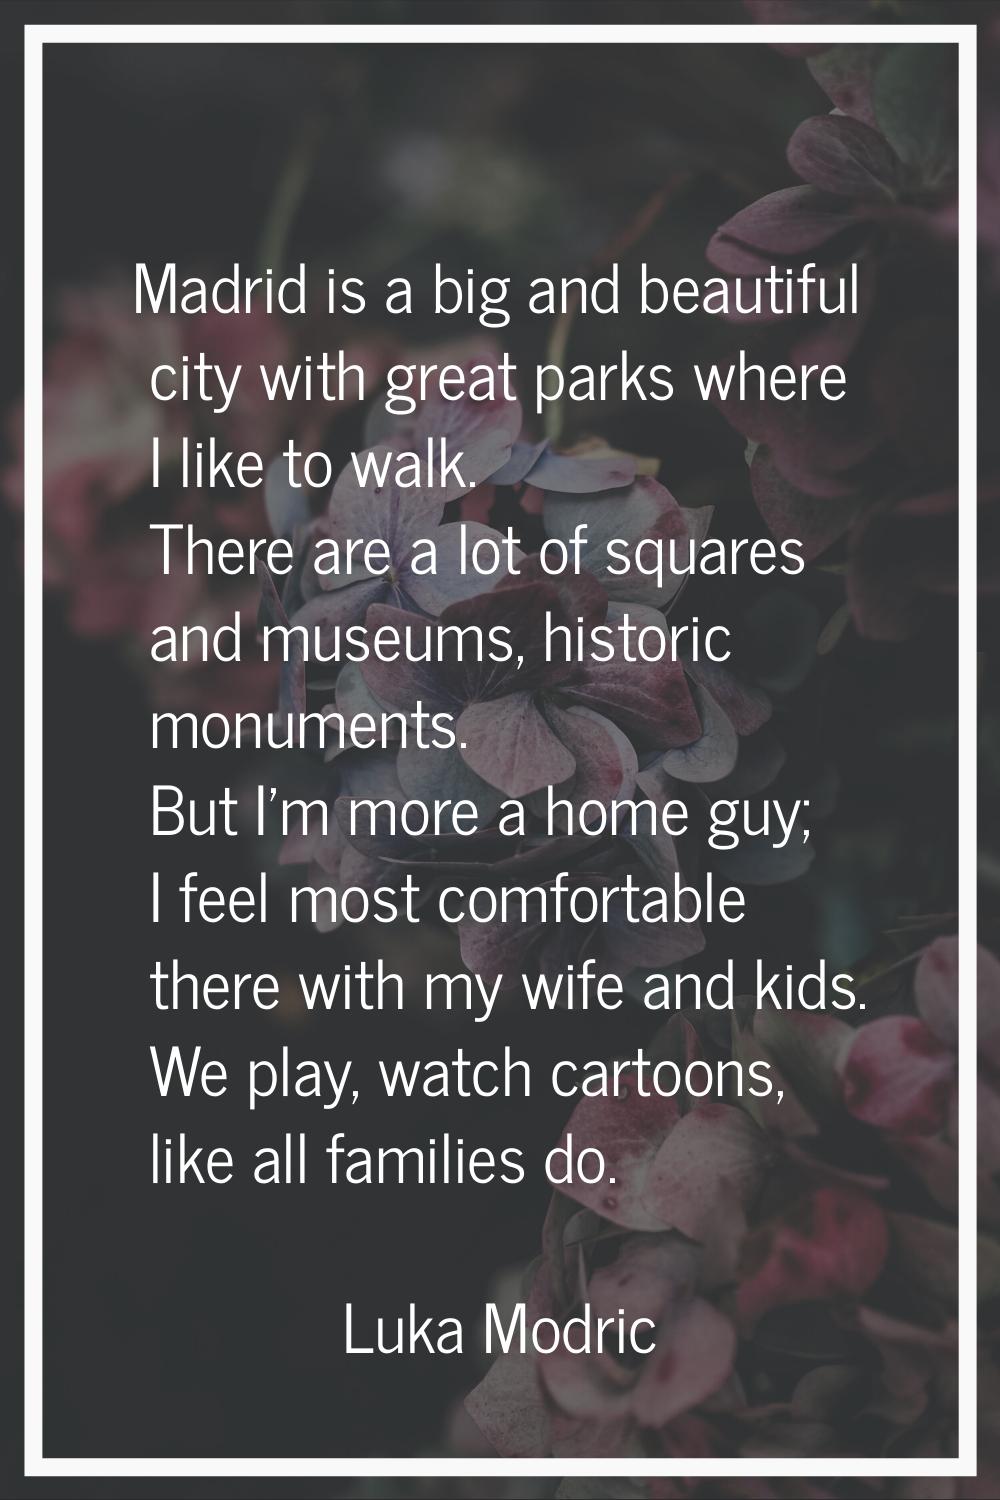 Madrid is a big and beautiful city with great parks where I like to walk. There are a lot of square